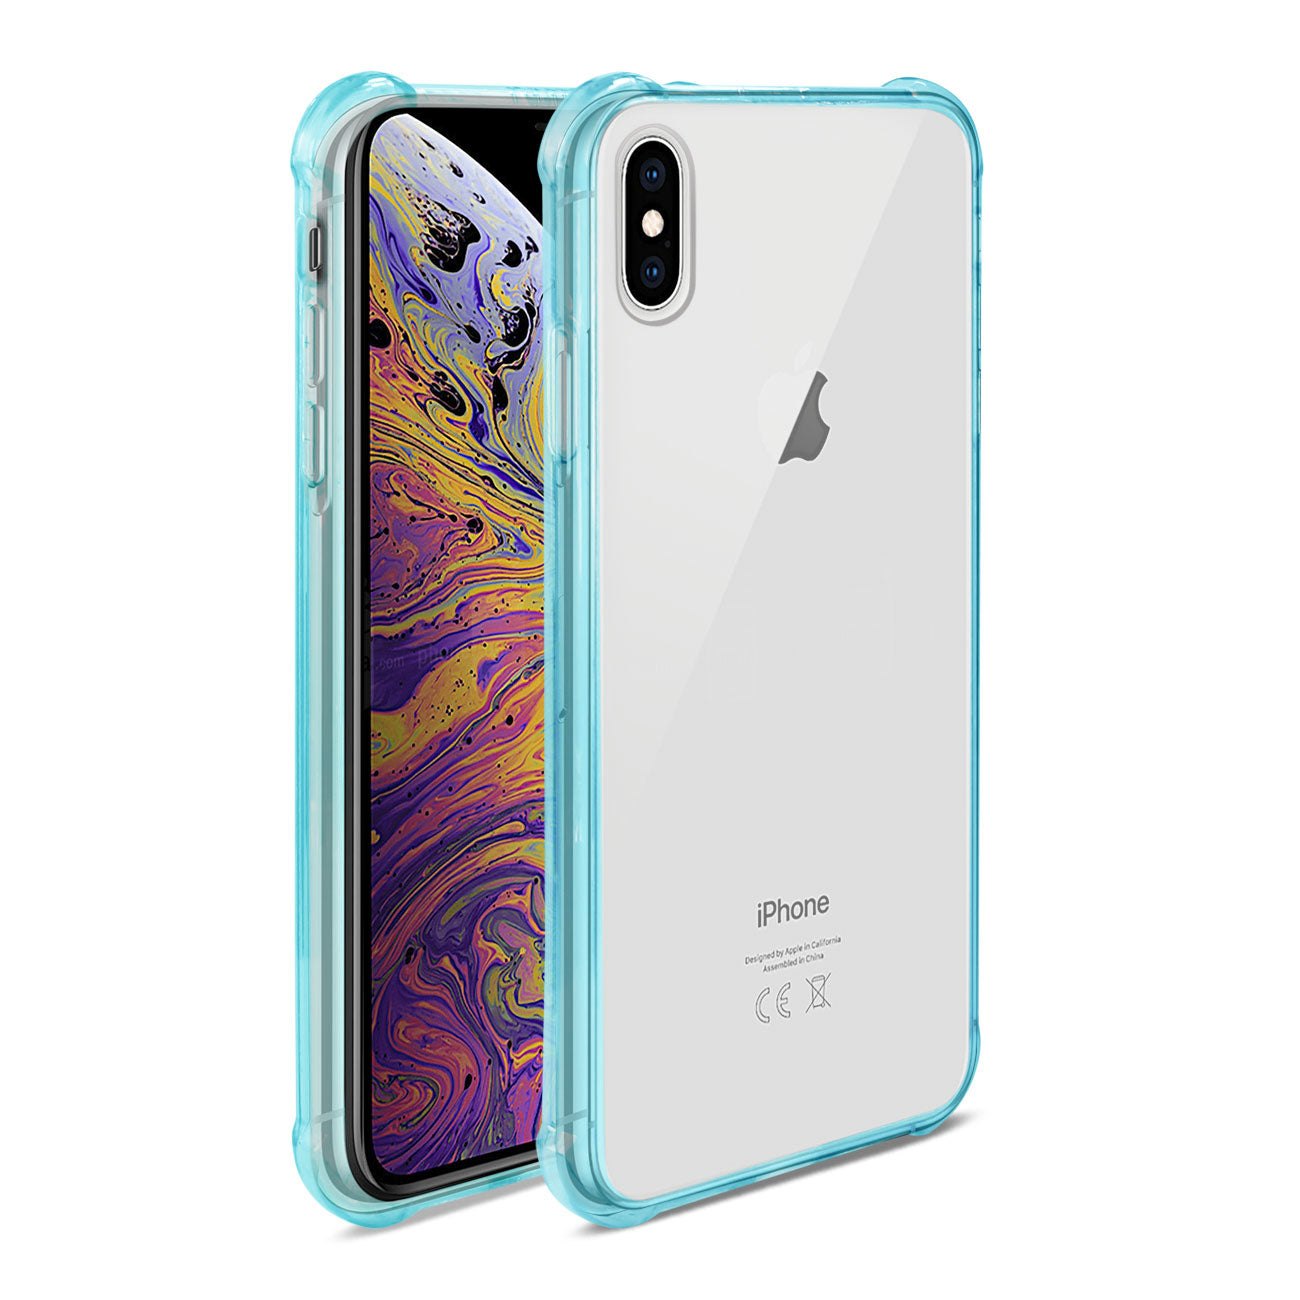 iPhone XS Max Clear Bumper Case With Air Cushion Protection In Clear Navy